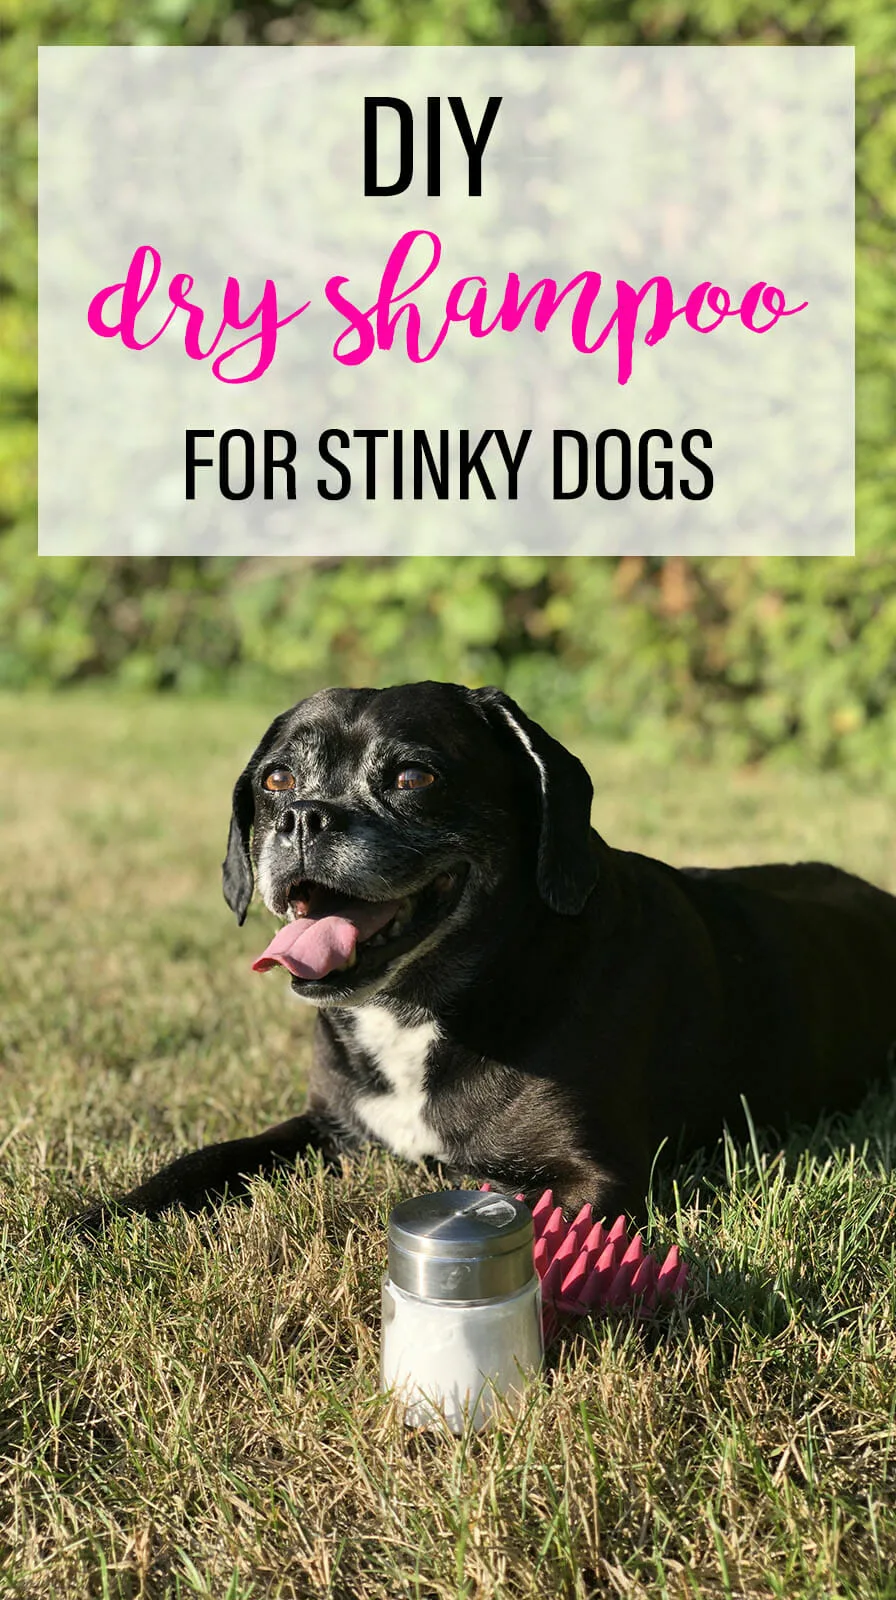 A black puggle with a shaker of DIY Dry Dog shampoo and a rubber grooming brush. Text says: DIY Dry Shampoo for Stinky Dogs